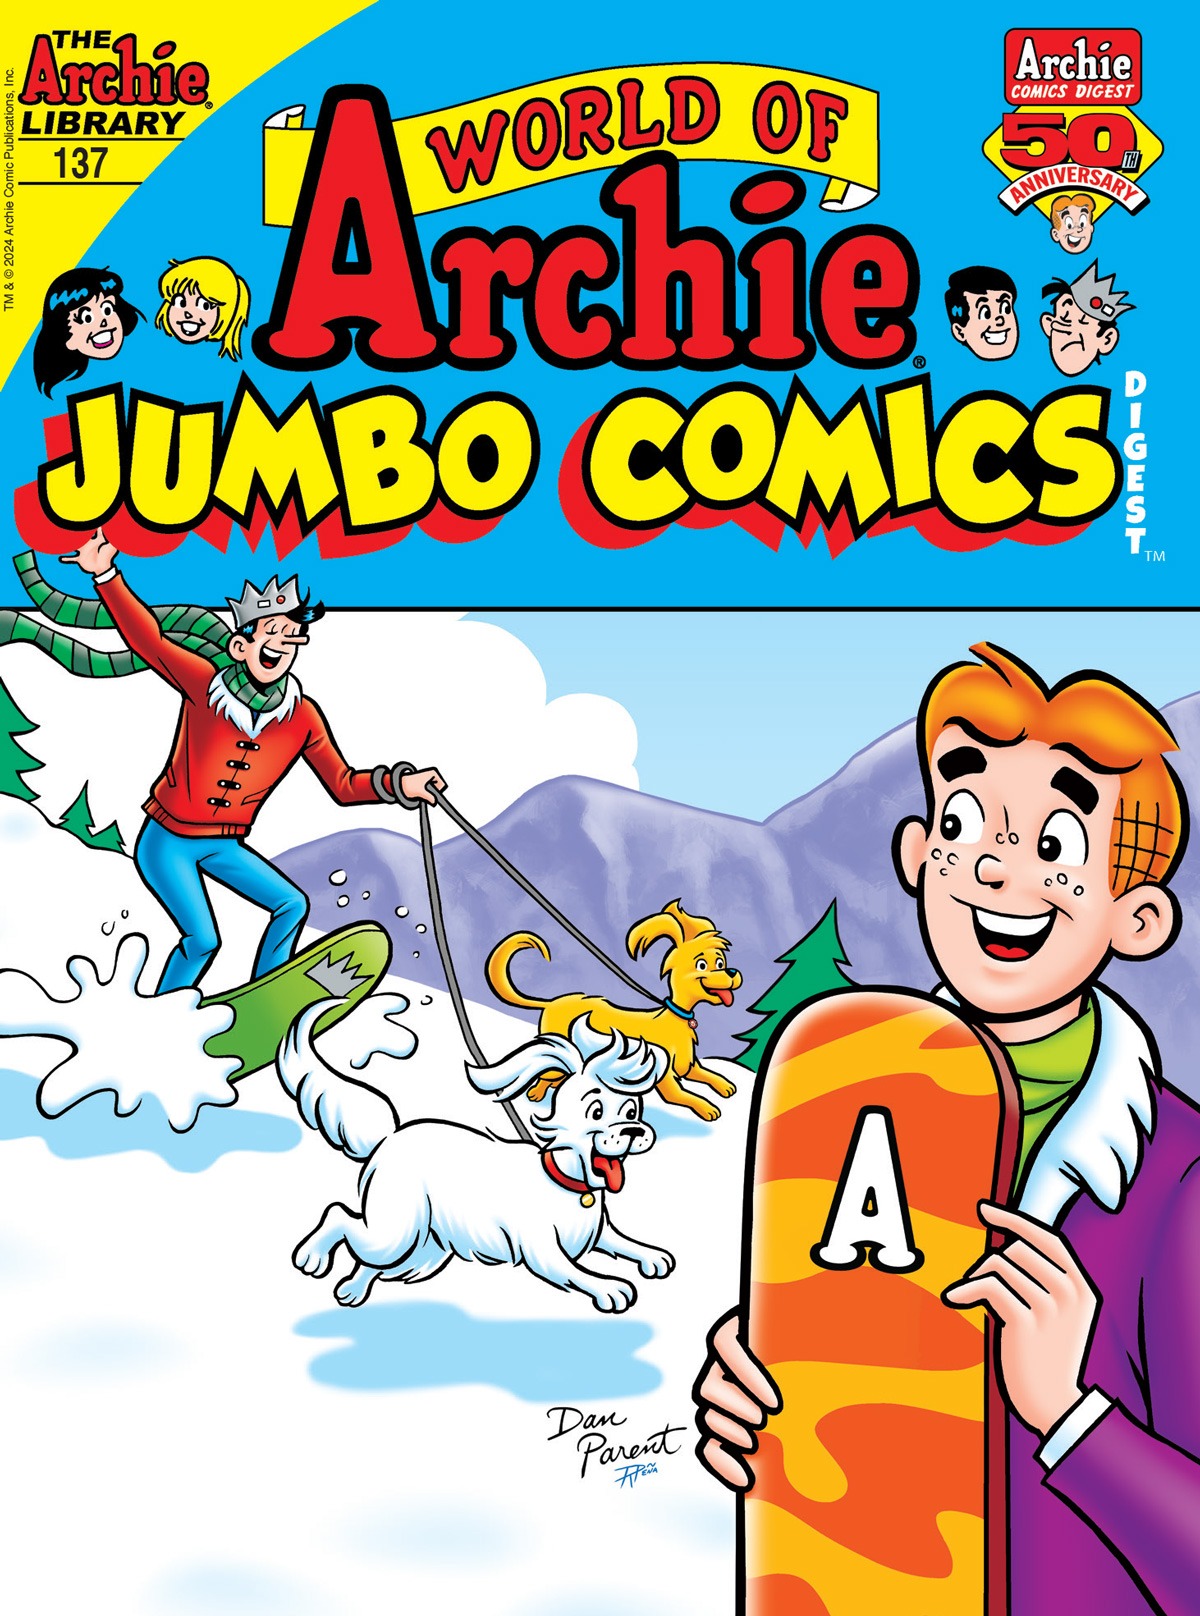 Cover of World of Archie Jumbo Comics Digest #137, showing Jughead snowboarding down a hill led by two dogs on leashes, and Archie smiling in the foreground and holding a snowboard of his own.